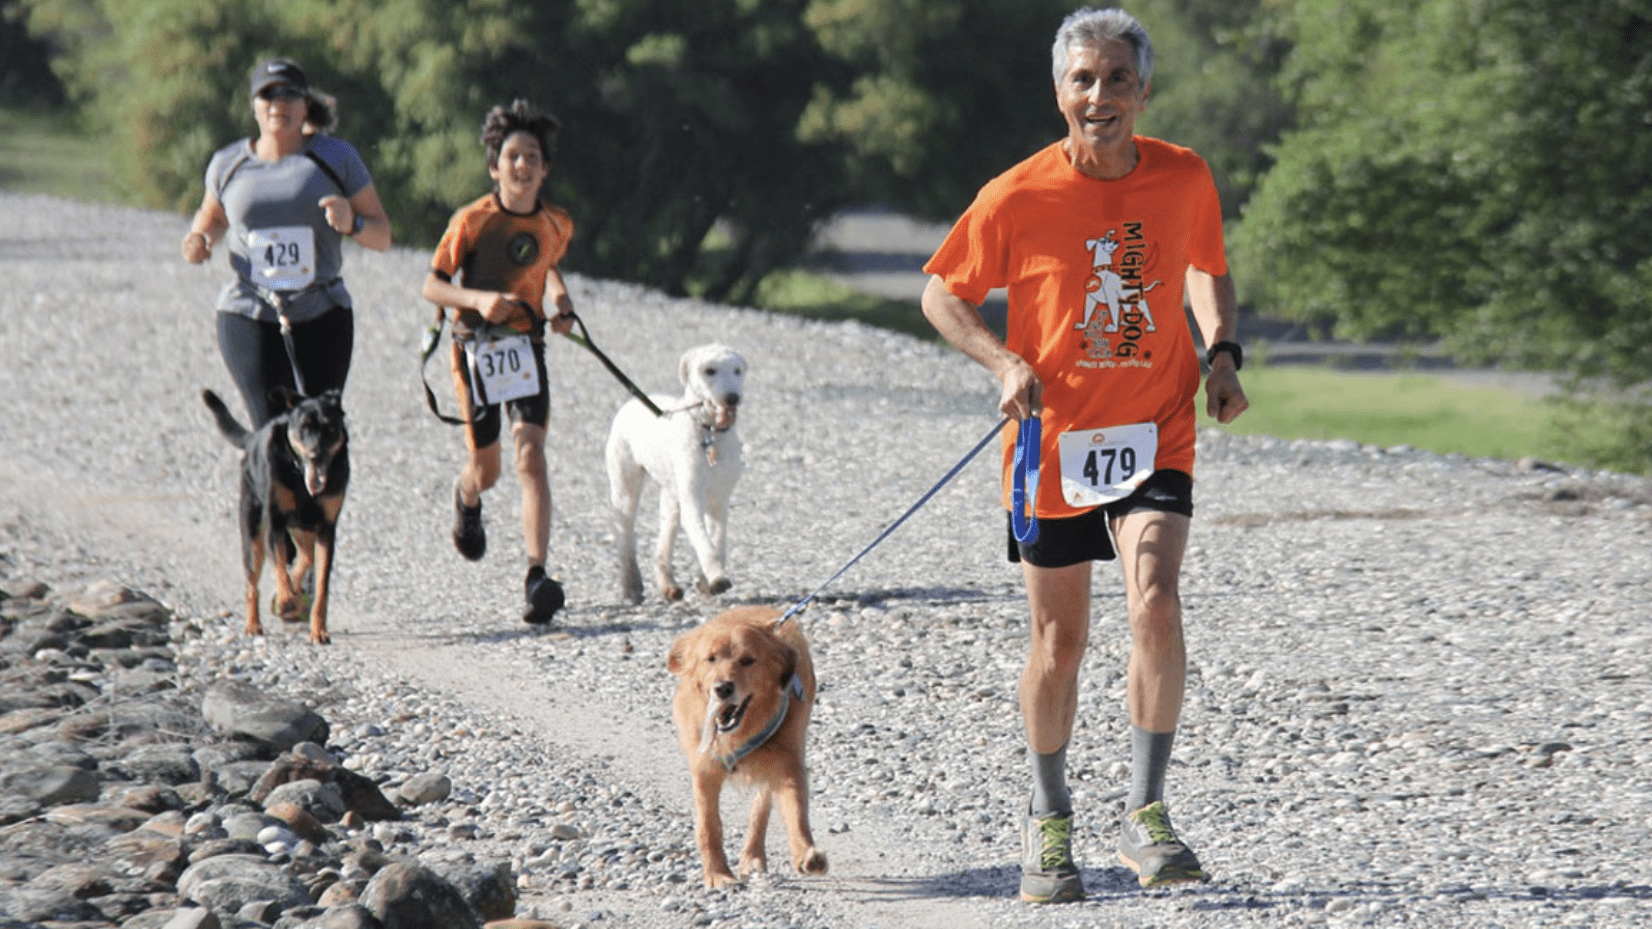 Runners with dogs on the race route